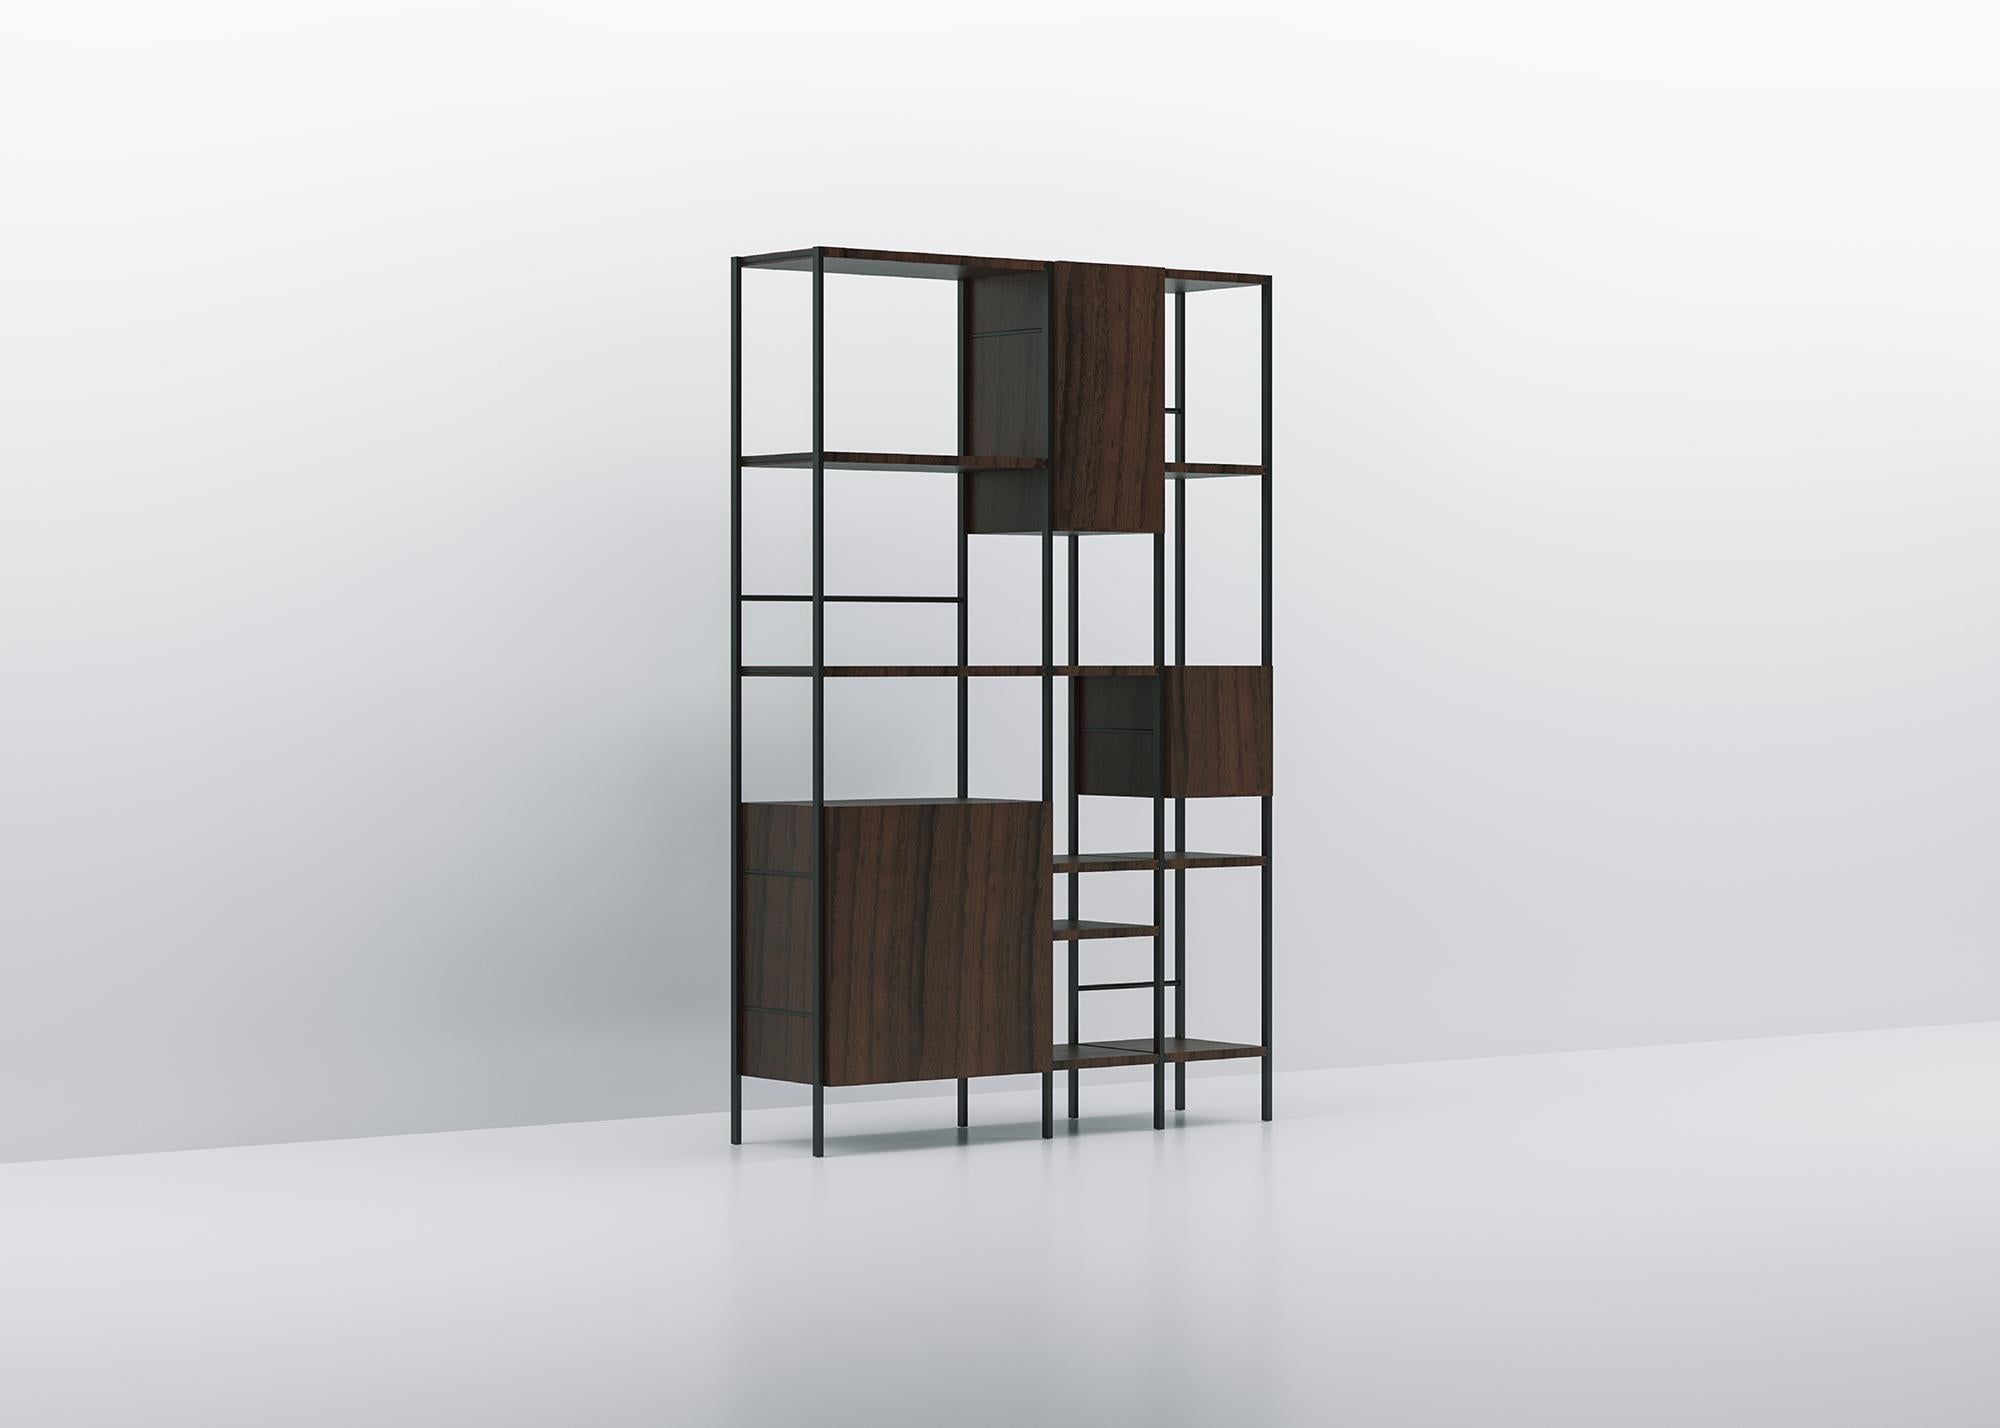 A freestanding bookcase, which can be placed against the wall or in the center of the room. The various elements can be inserted simply by sliding the round profiles of the metal structure into the unusual round recesses in the shelves and in the